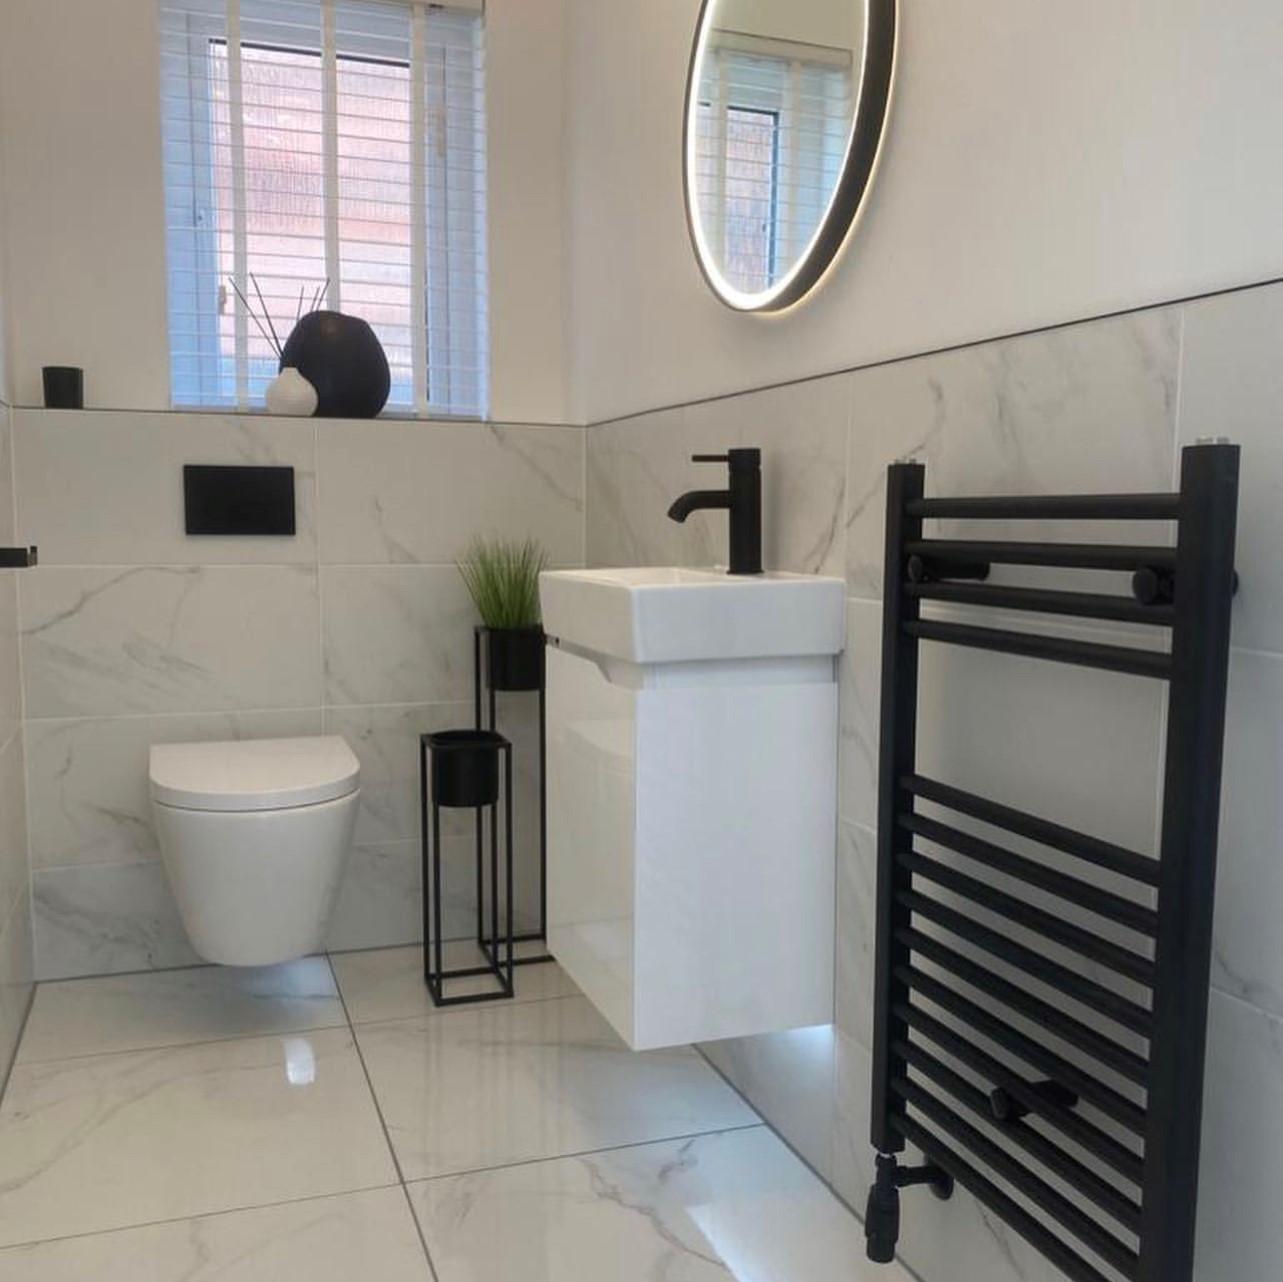 6 ideas to making a small bathroom better